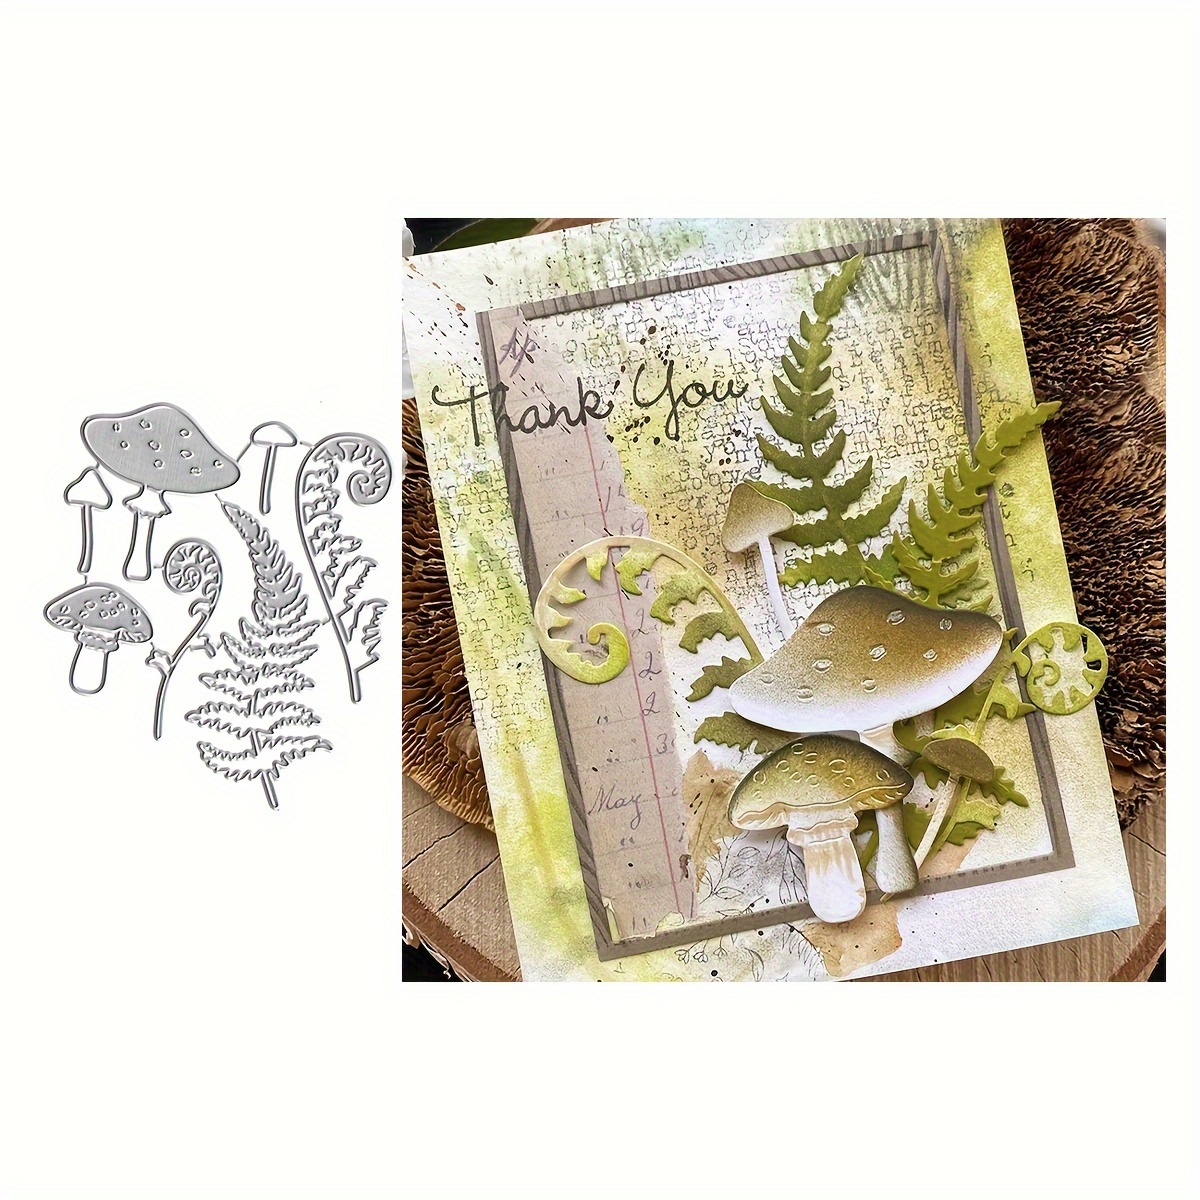 

Autumn Forest Metal Cutting Dies Set - Fern Leaves & Mushrooms For Diy Scrapbooking, Card Making & Paper Crafts - Thanksgiving Themed Embossing Stencils